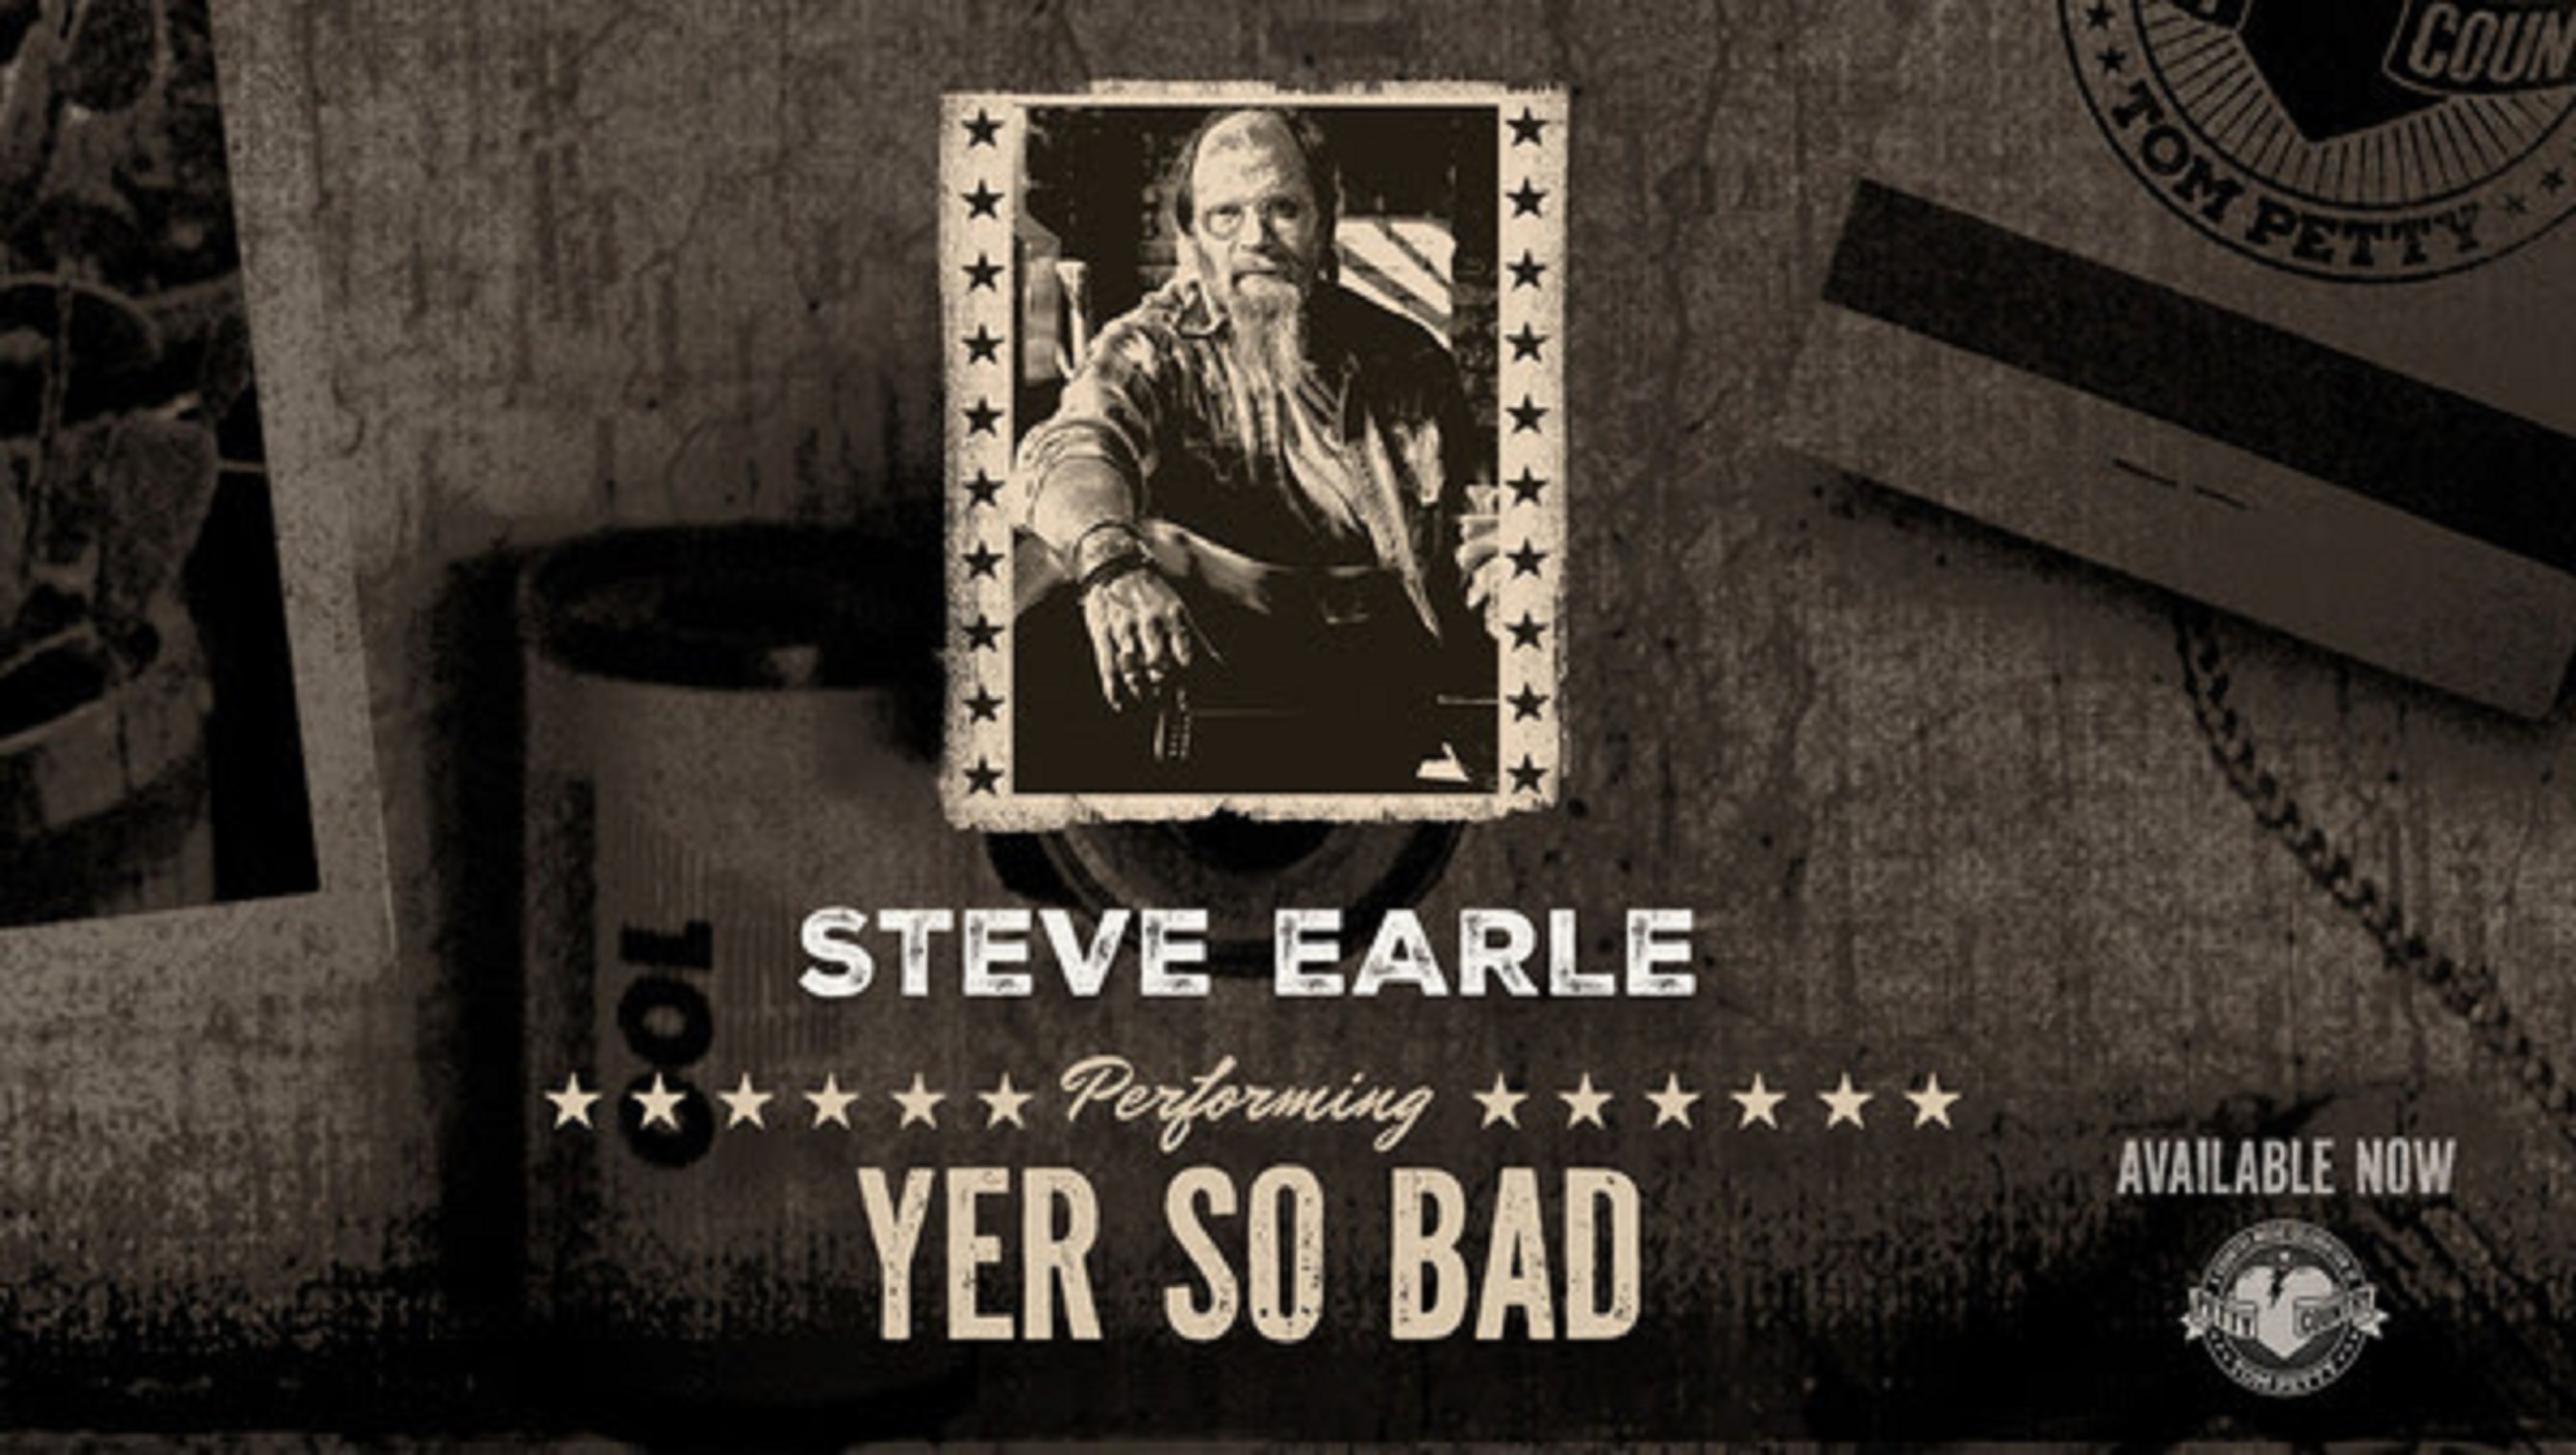 Steve Earle's rendition of Tom Petty's "Yer So Bad" out today